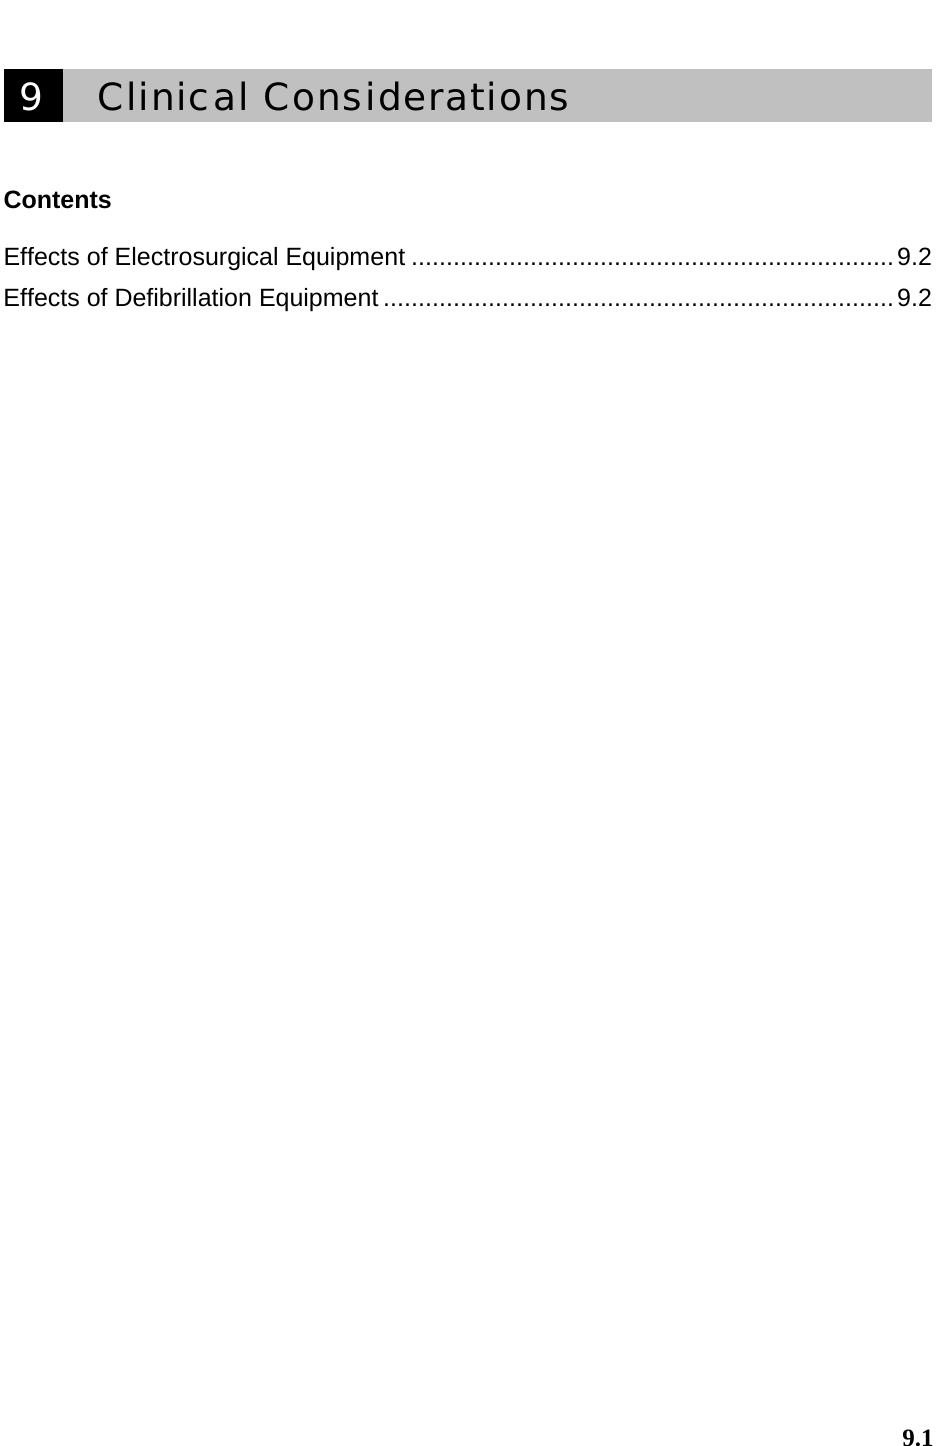         9.1   9    Clinical Considerations       Contents  Effects of Electrosurgical Equipment .....................................................................9.2 Effects of Defibrillation Equipment .........................................................................9.2   